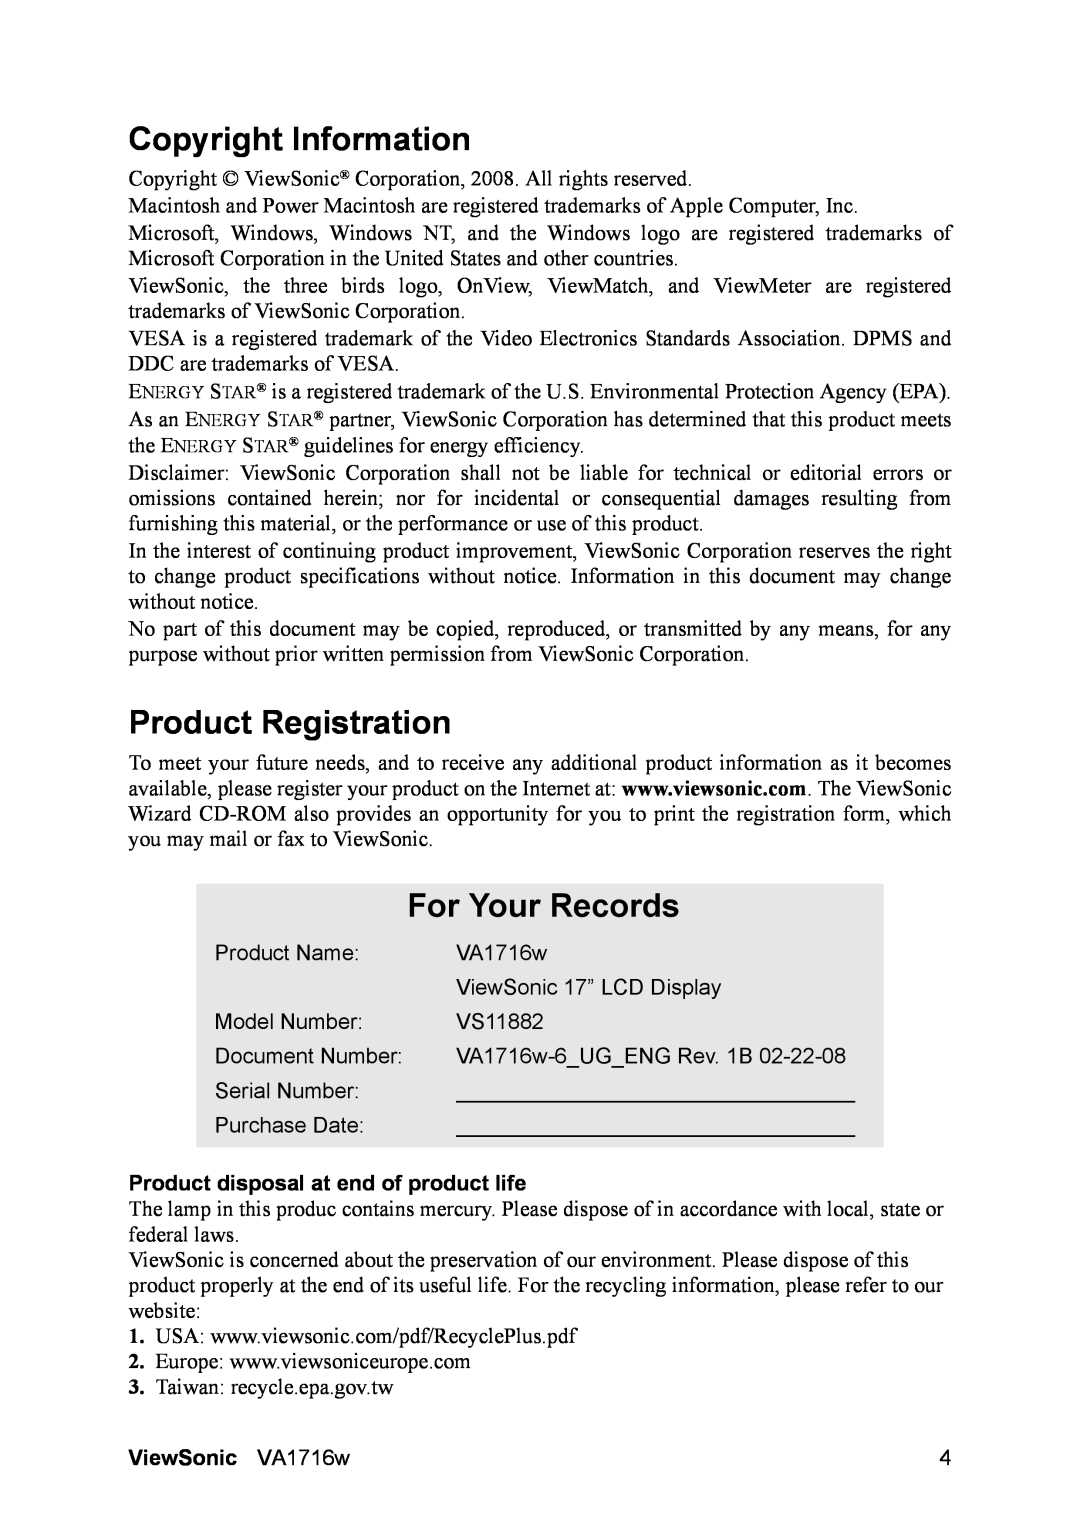 ViewSonic VA1716w Copyright Information, Product Registration, For Your Records, Product disposal at end of product life 